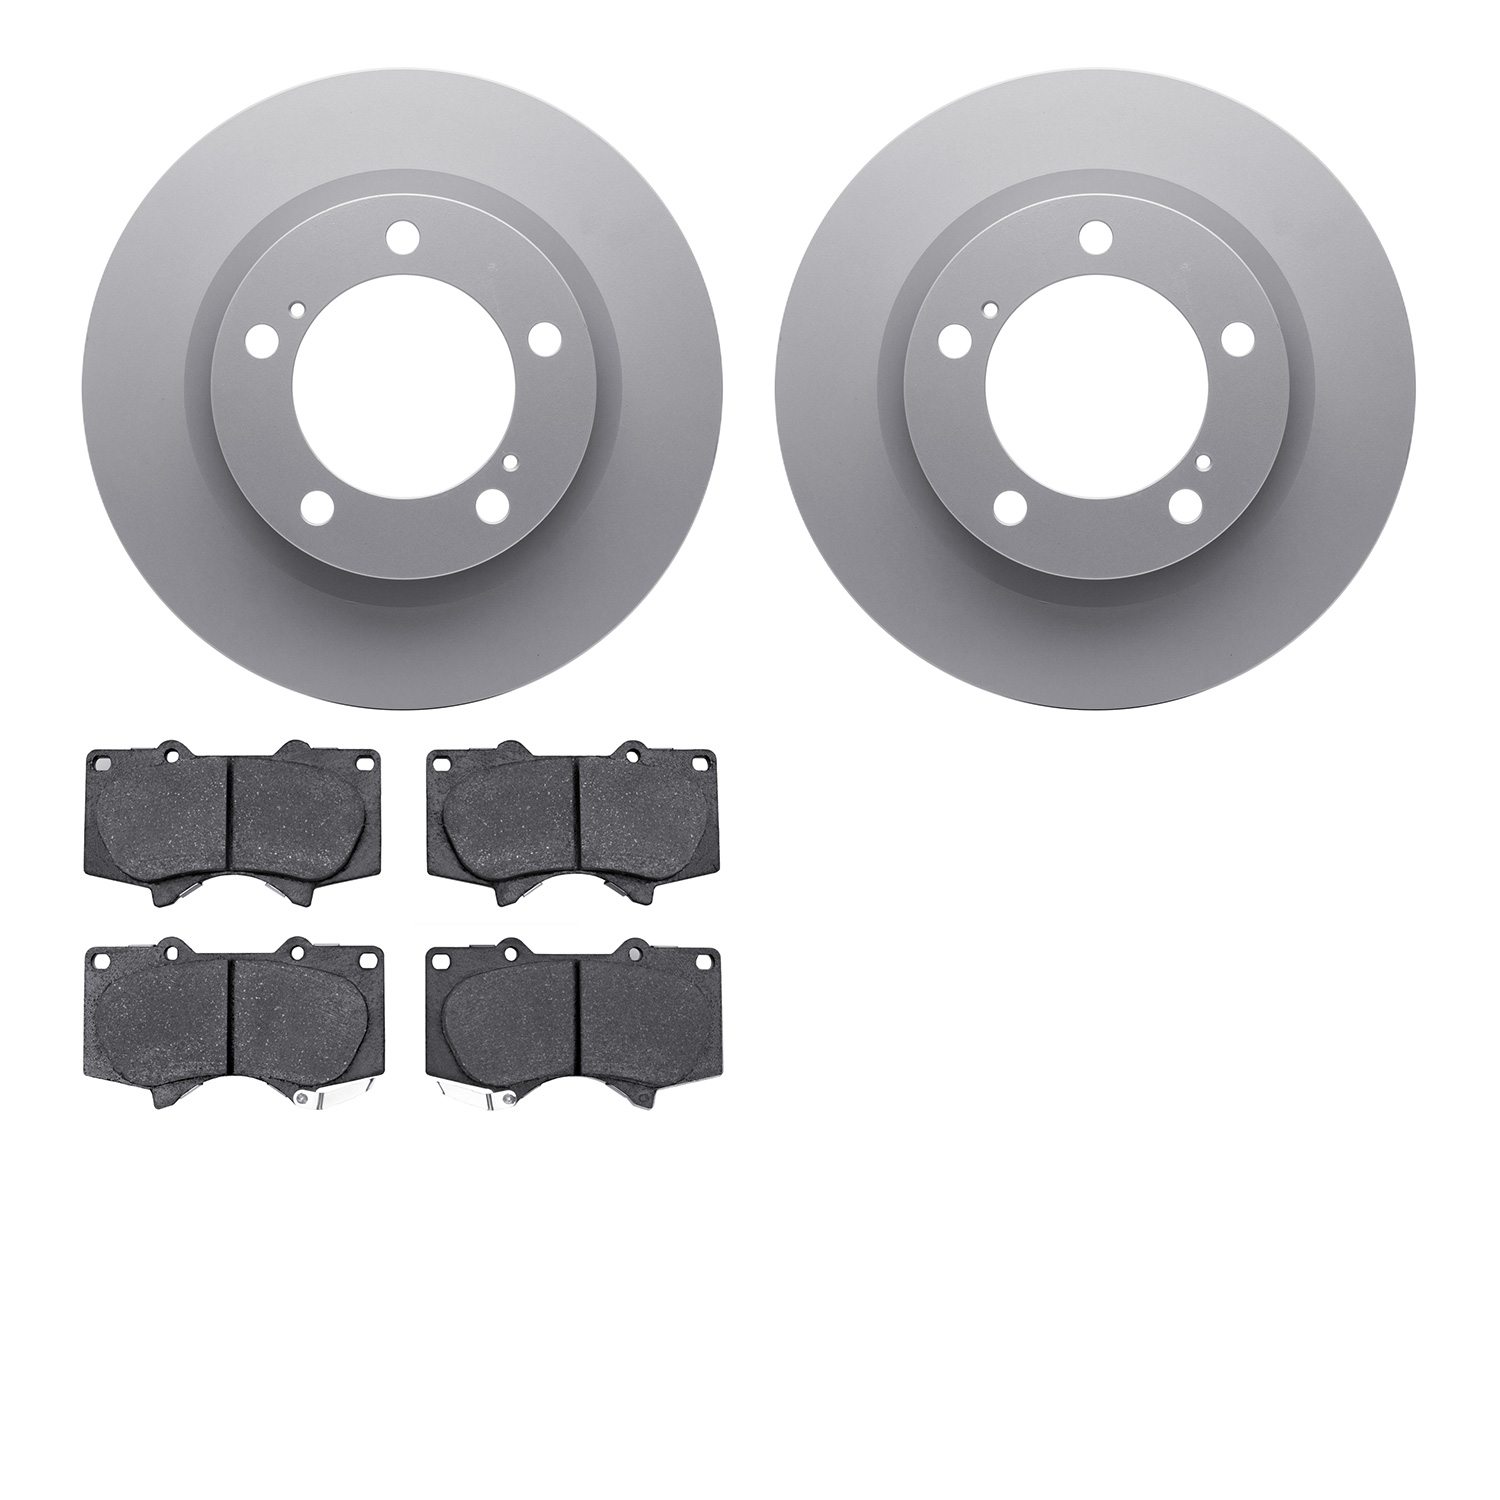 4402-76016 Geospec Brake Rotors with Ultimate-Duty Brake Pads Kit, Fits Select Lexus/Toyota/Scion, Position: Front